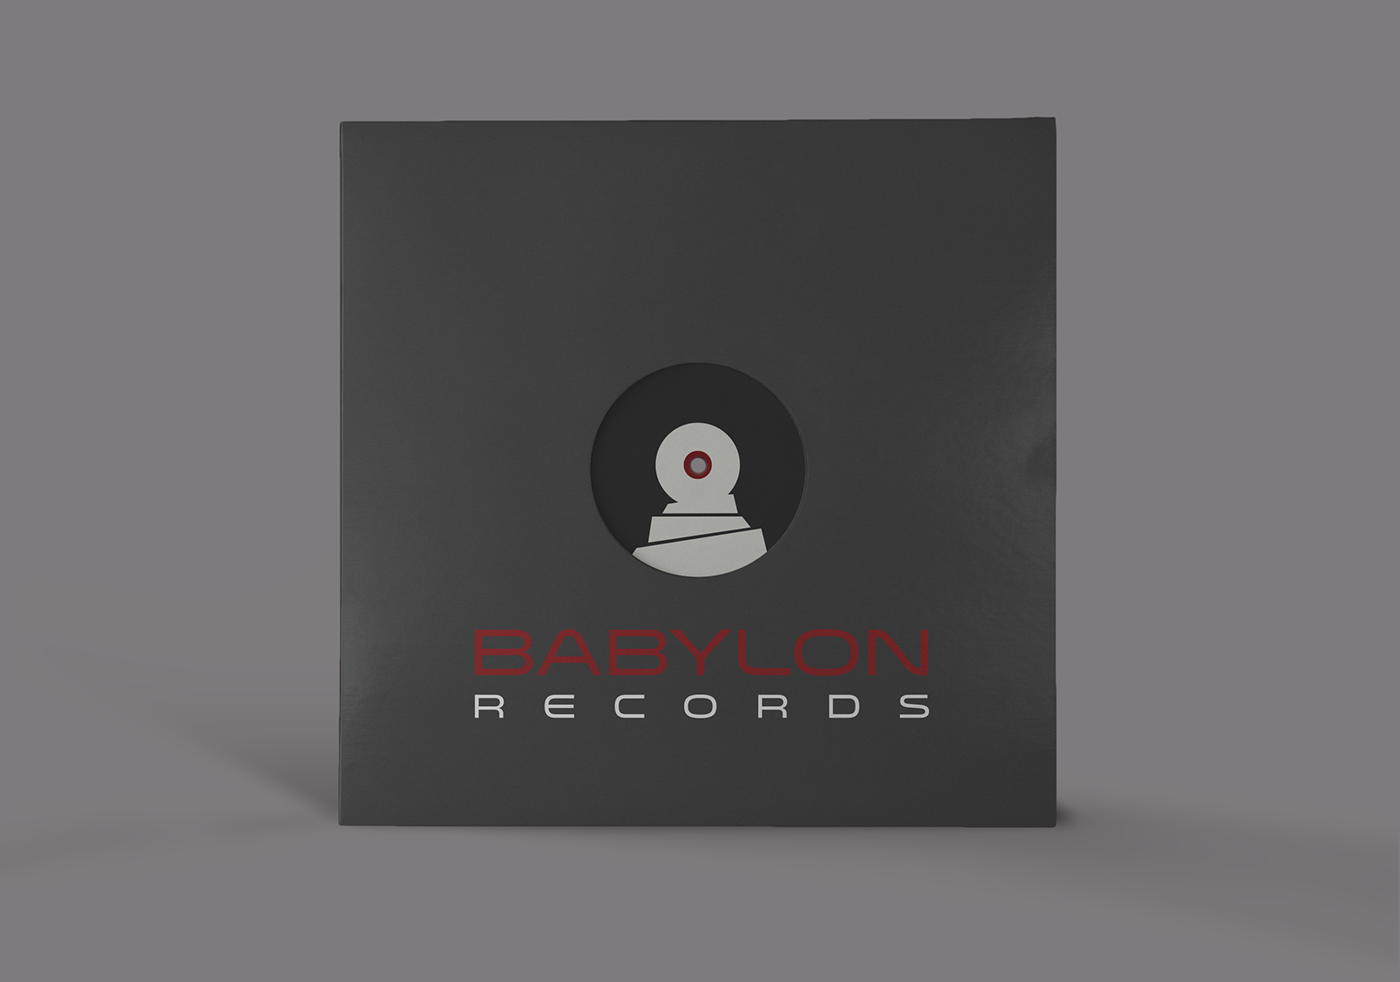 logo brand marchio Records Project music store babylon vinyl torre babele tower disco music industry recording Logo Design